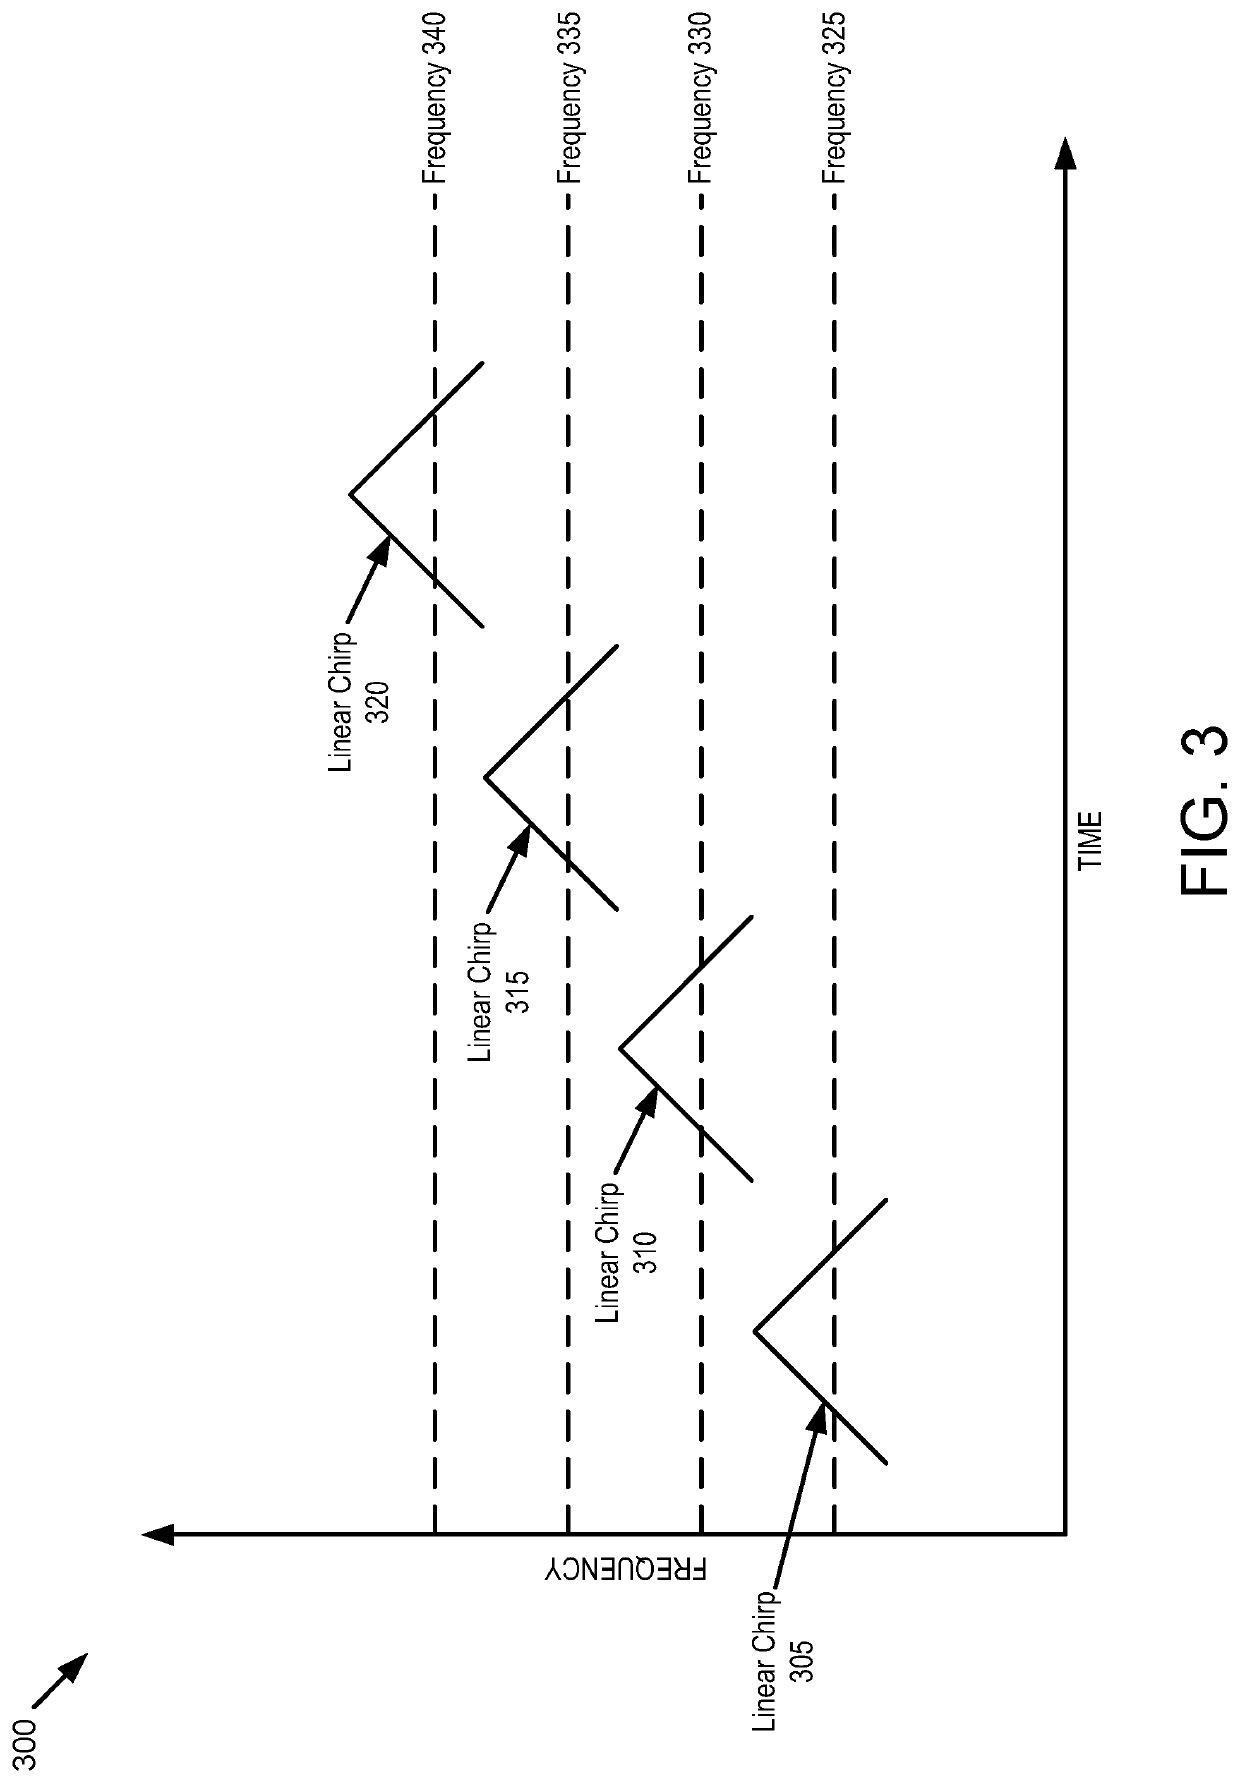 Lidar system with solid state spectral scanning